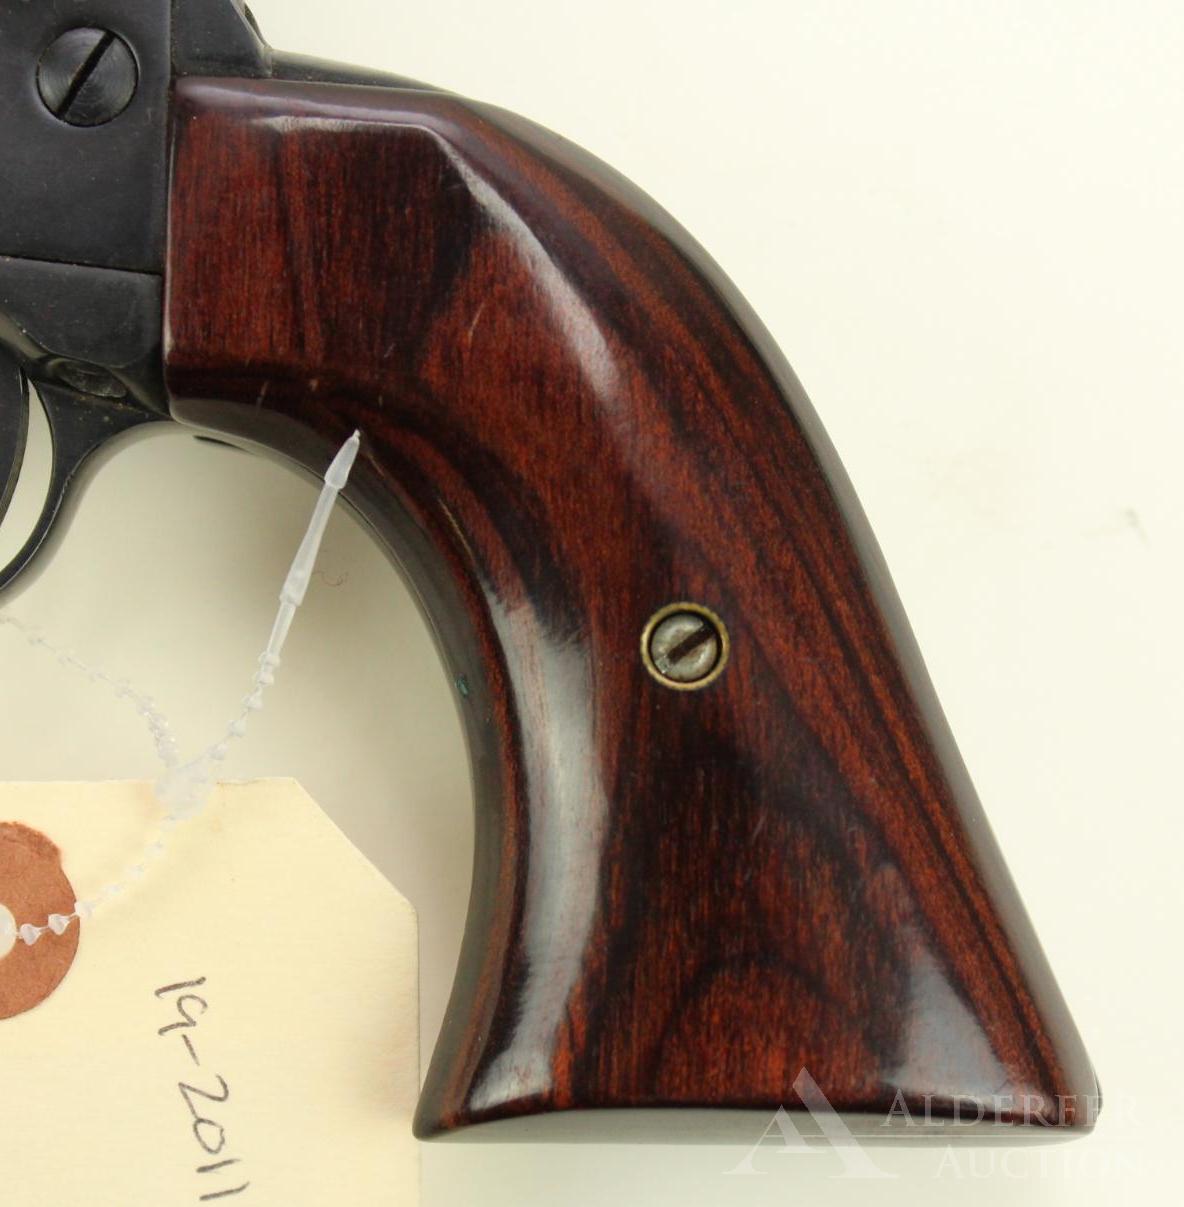 JP Sauer & Son/Hawes Firearms Western Marshal single action revolver.